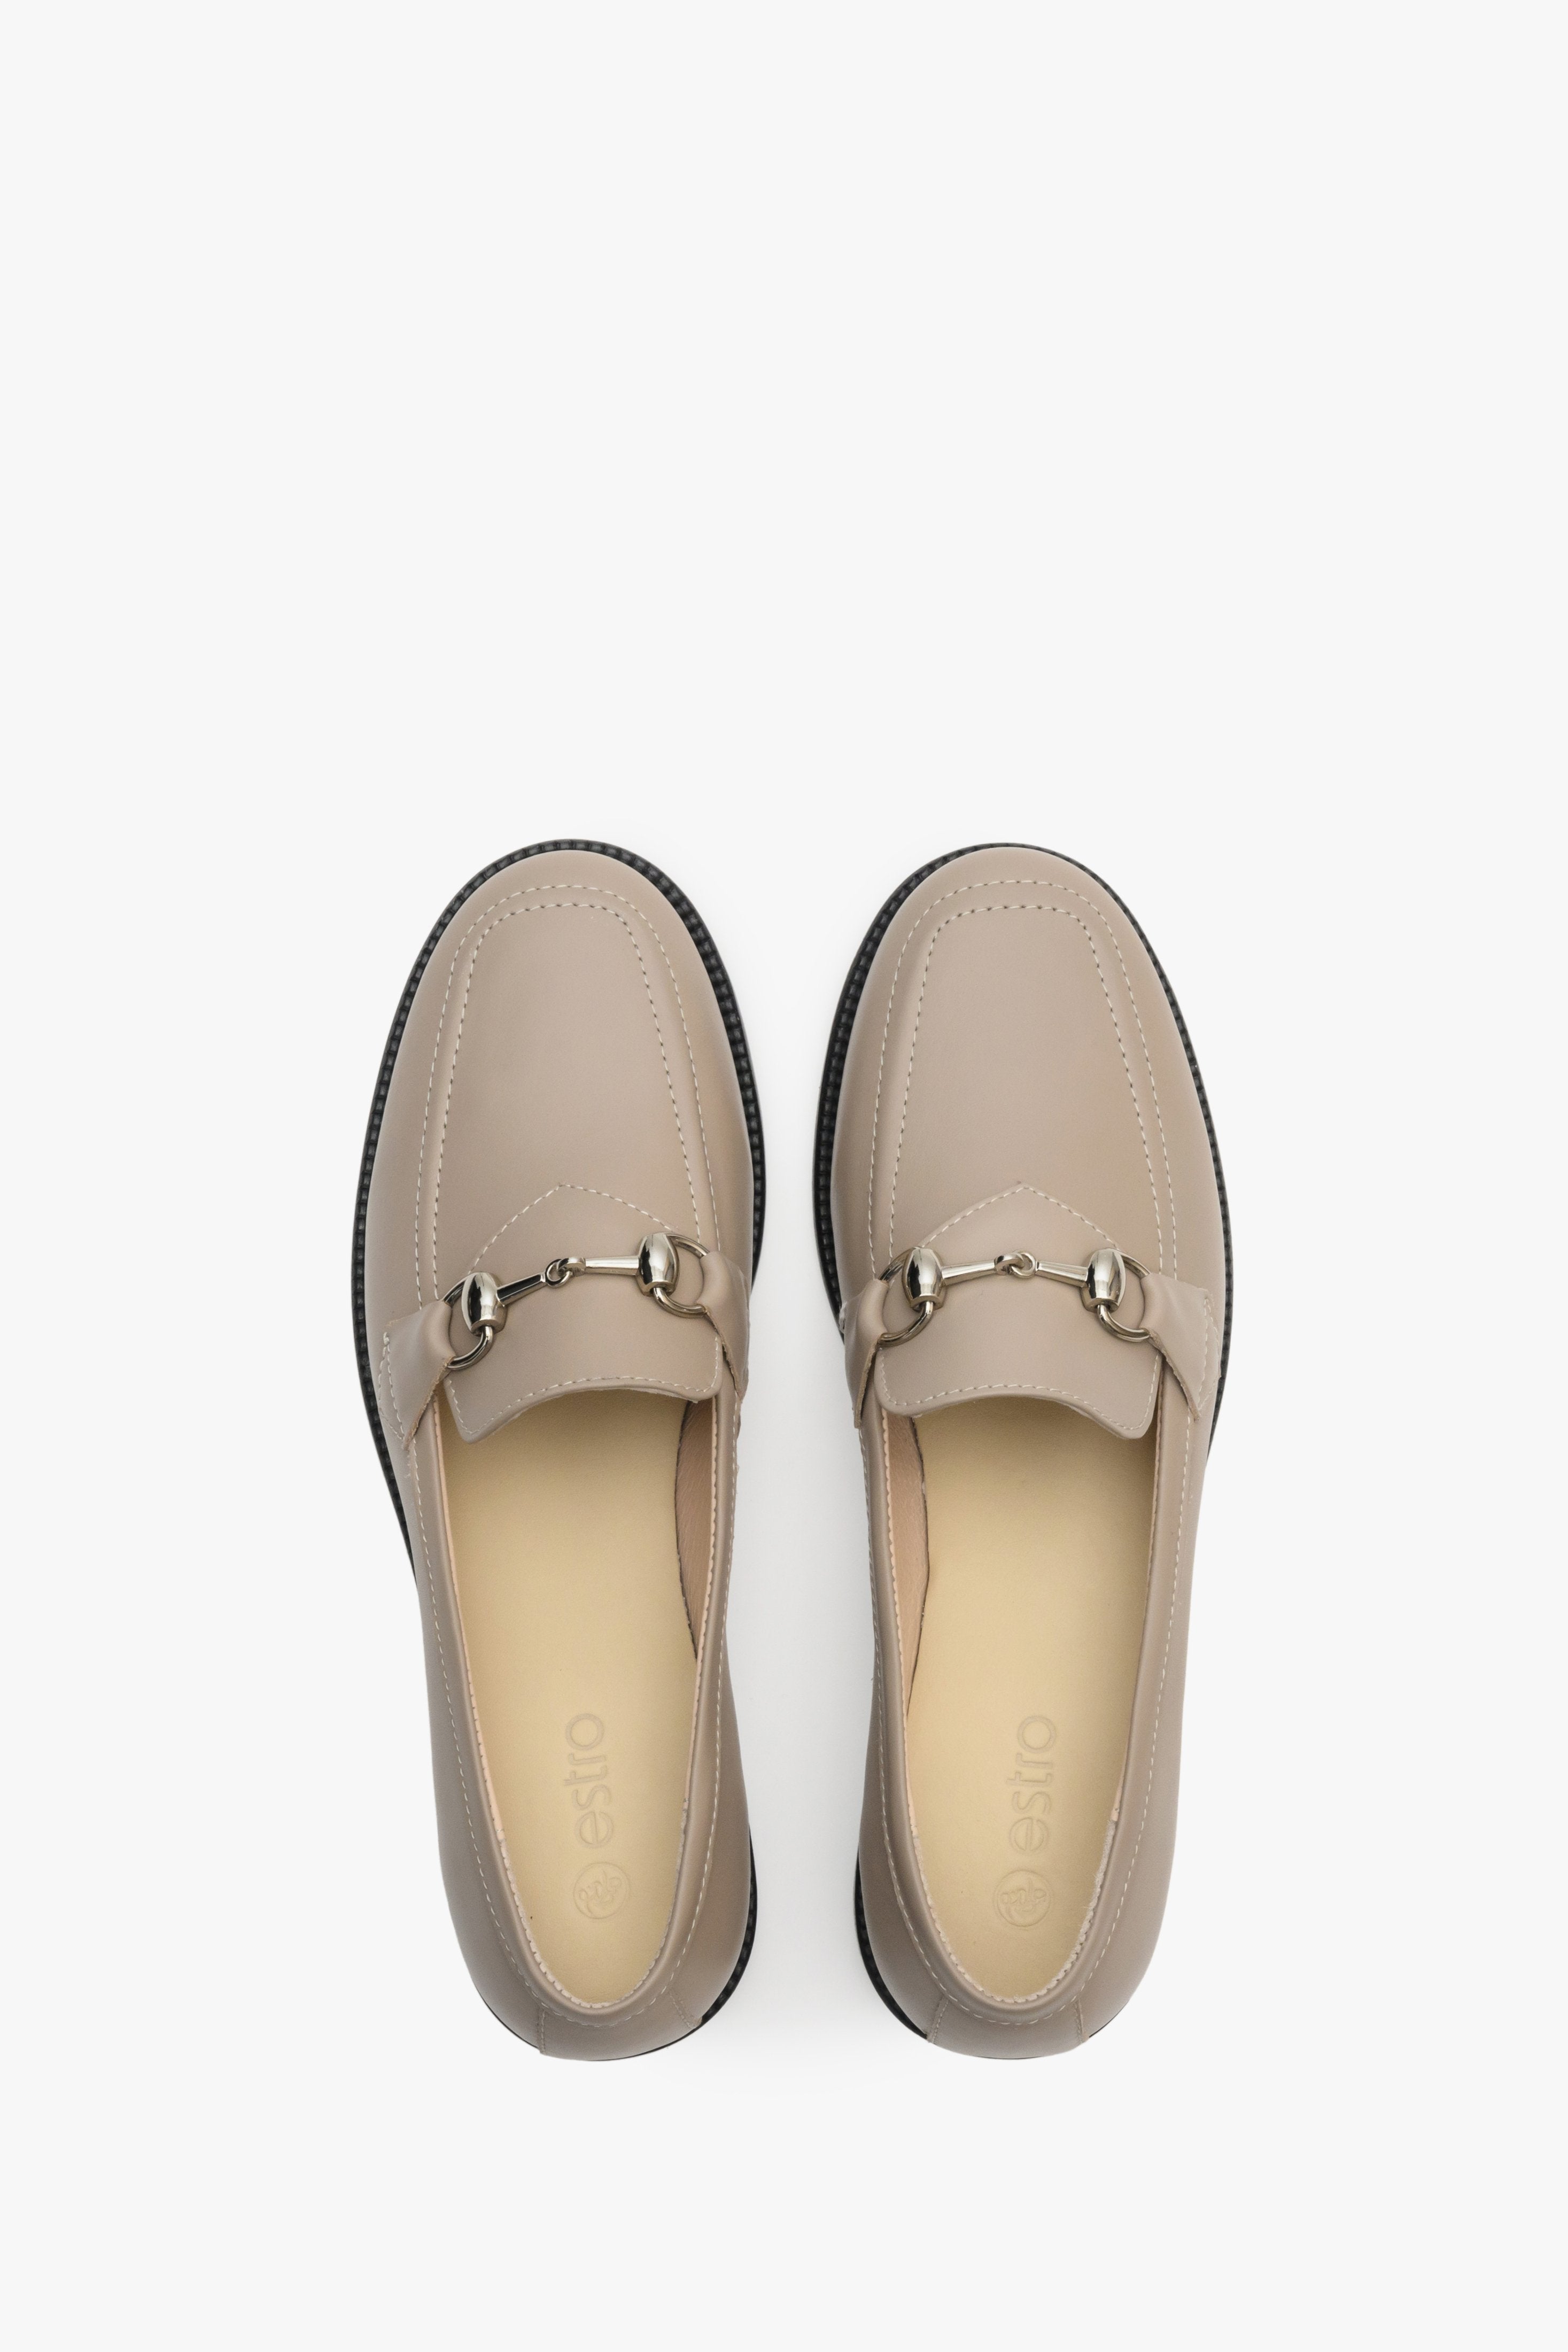 Elegant, beige women's loafers made of Italian leather - close-up form above. 